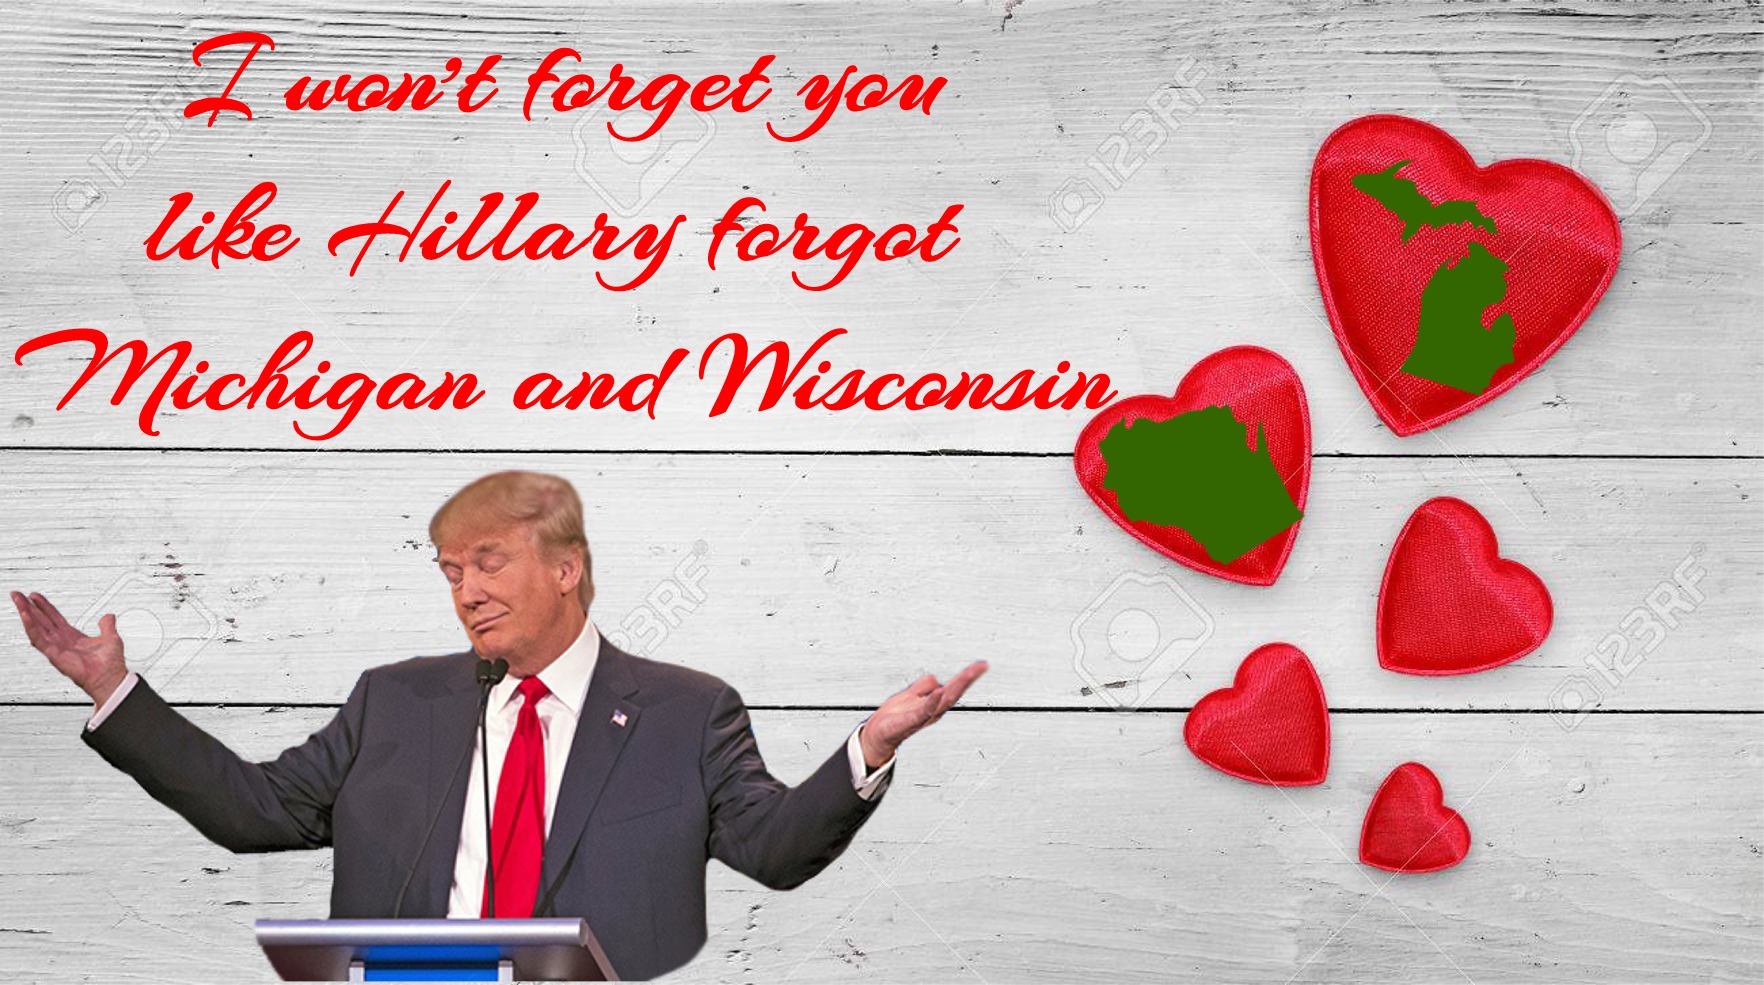 memes - large valentines background - Z won't forget you Hillary forgot Michigan and Wisconsin